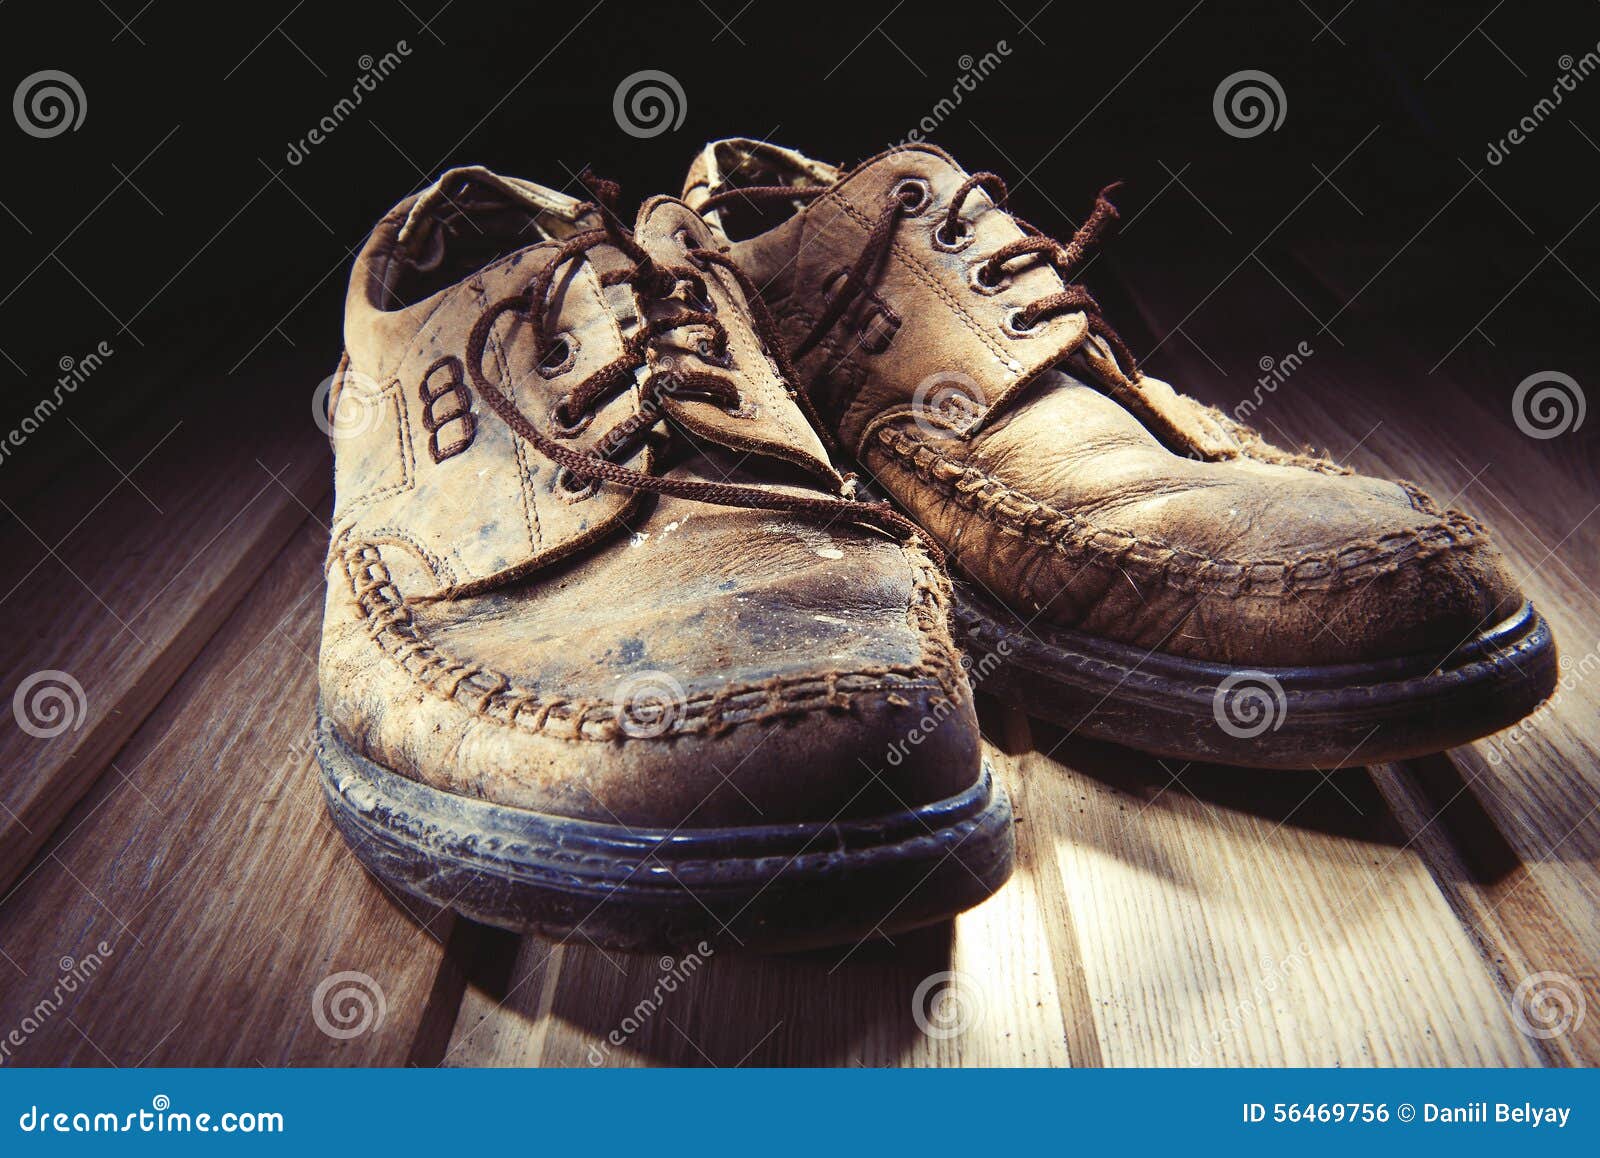 Old shoes stock photo. Image of shoes, ancient, clothing - 56469756